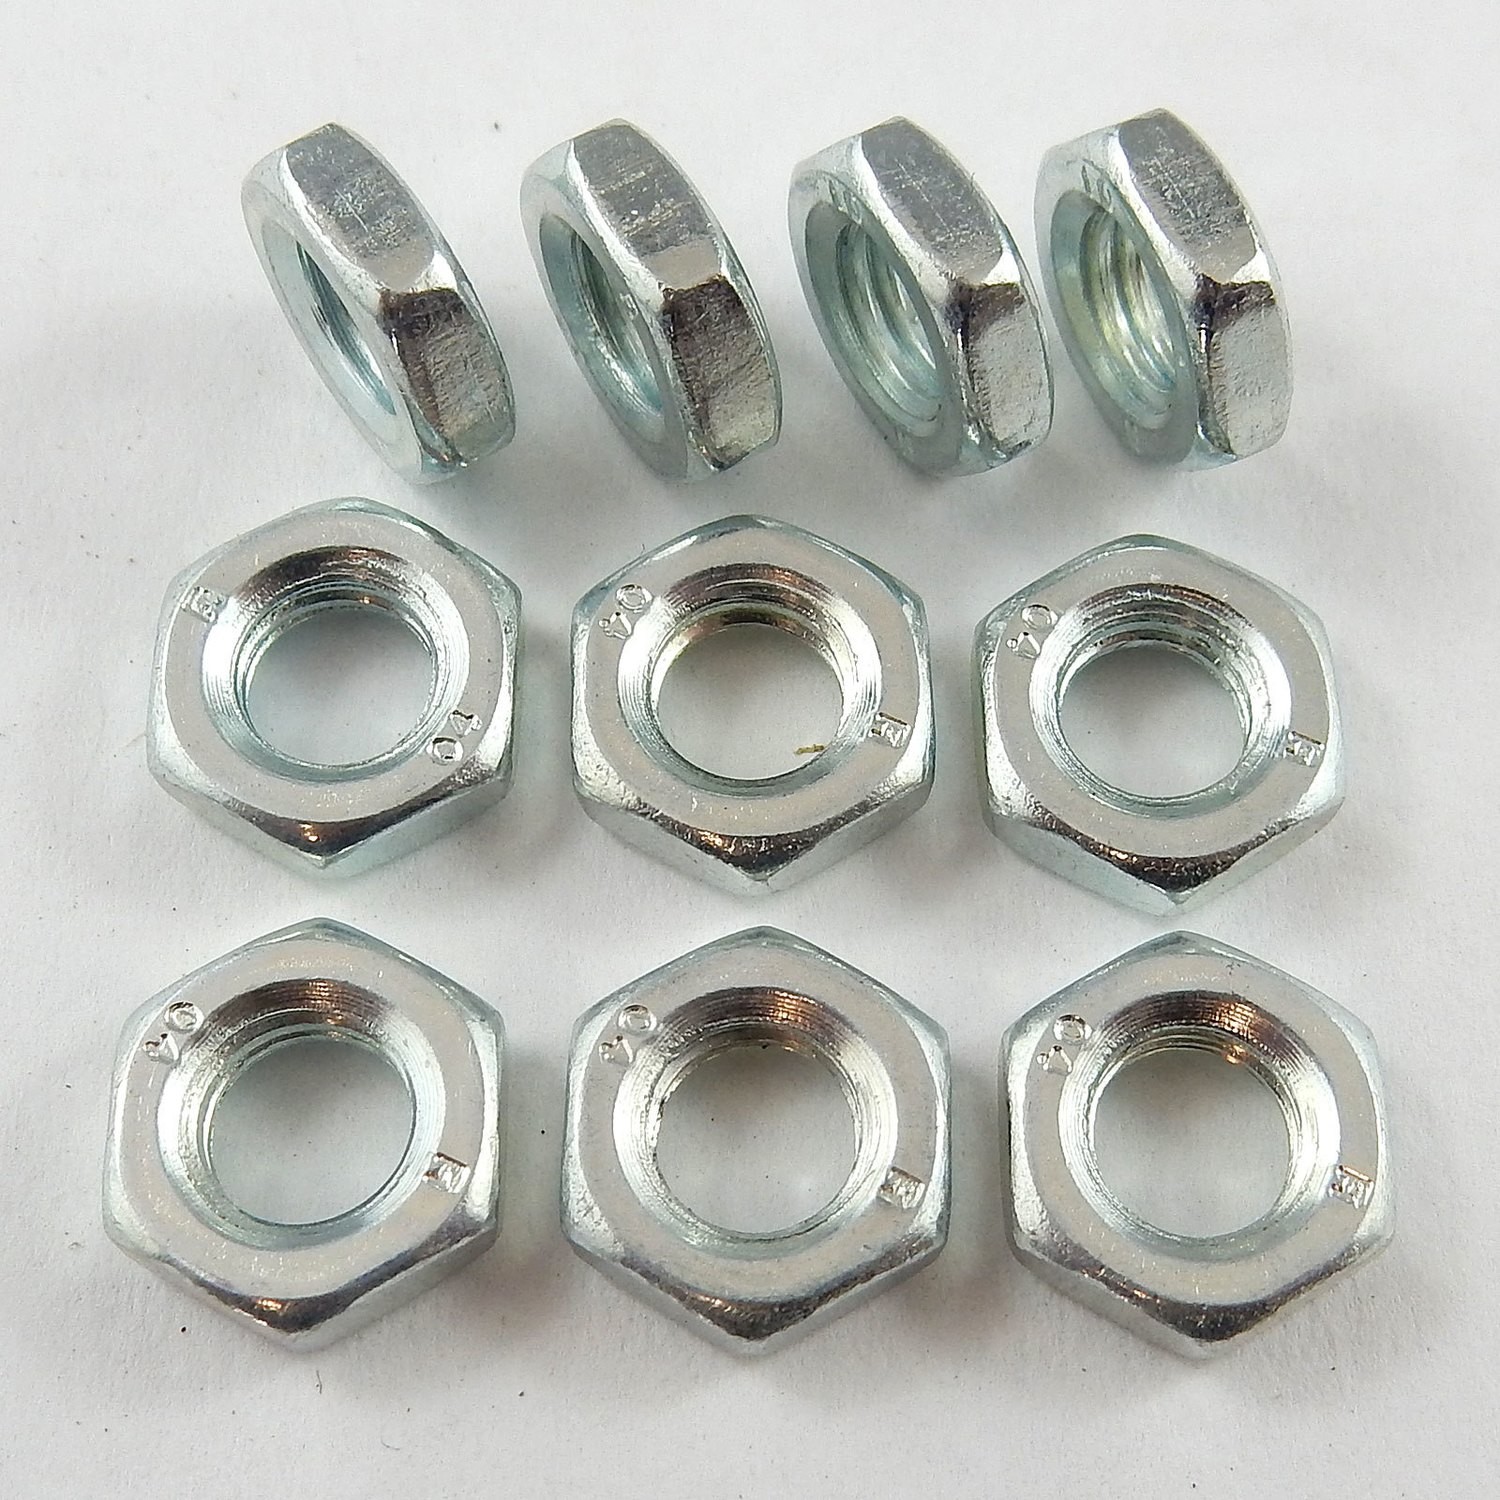 M6 (6MM) Right Hand Thin Jam Nut - Steel - 10 Pack